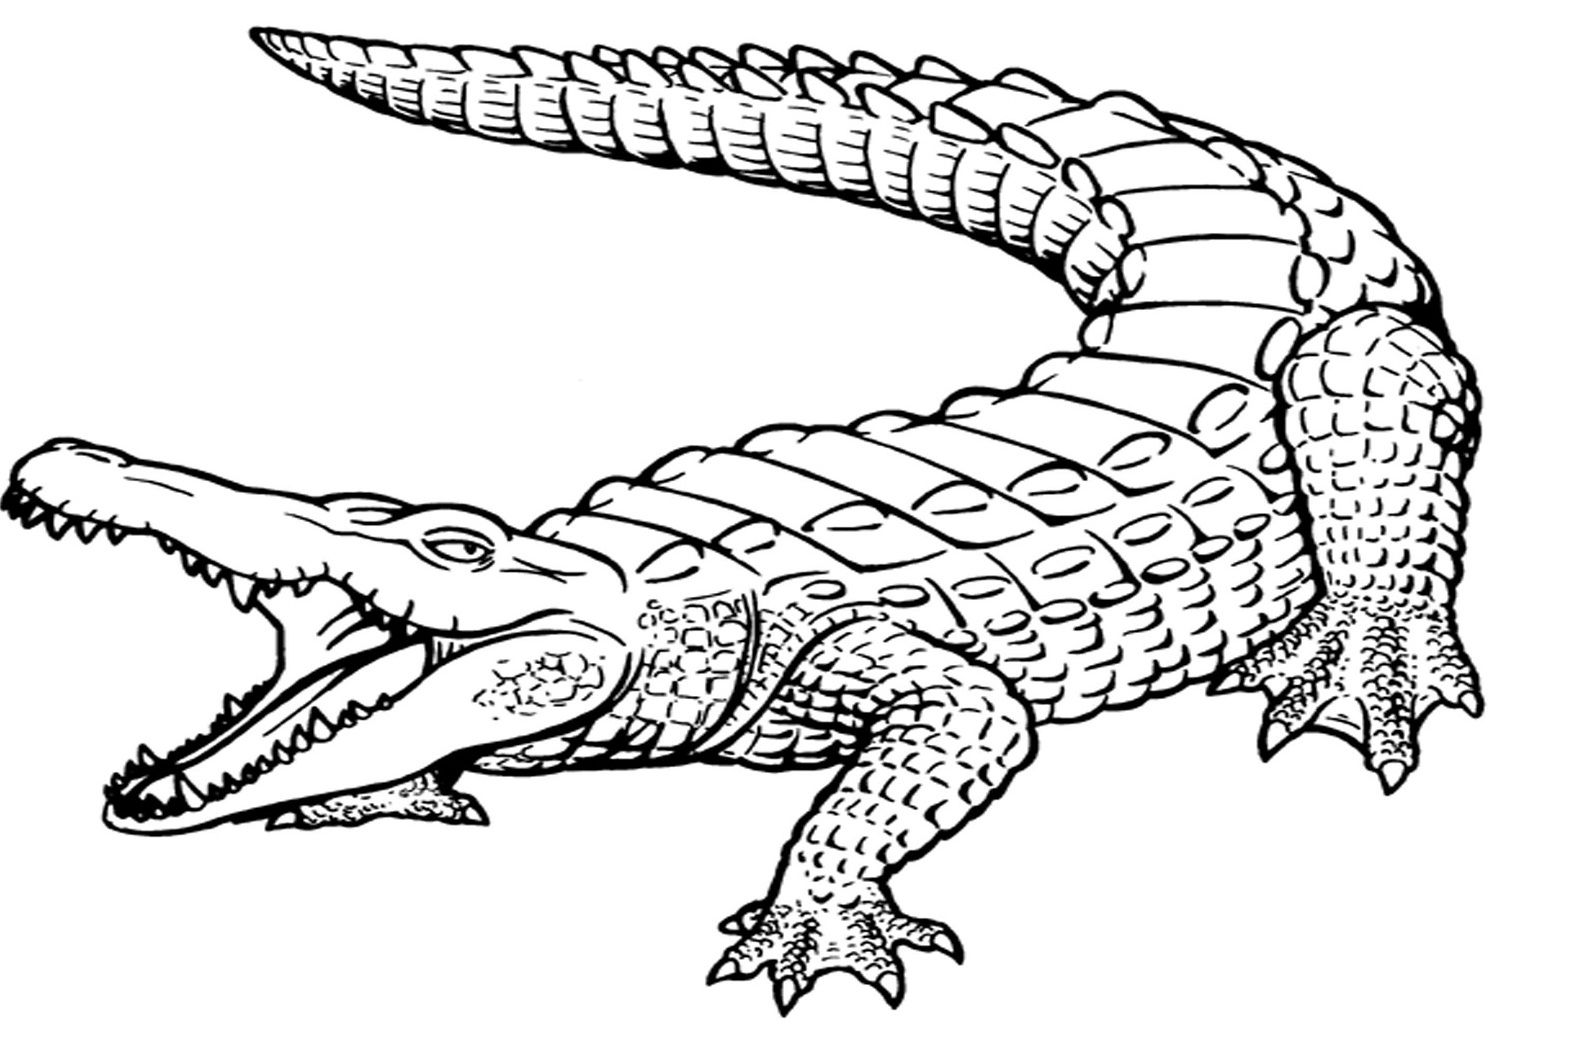 Crocodiles Great Wide Open Mouth Coloring Pages For Kids #bxv ...